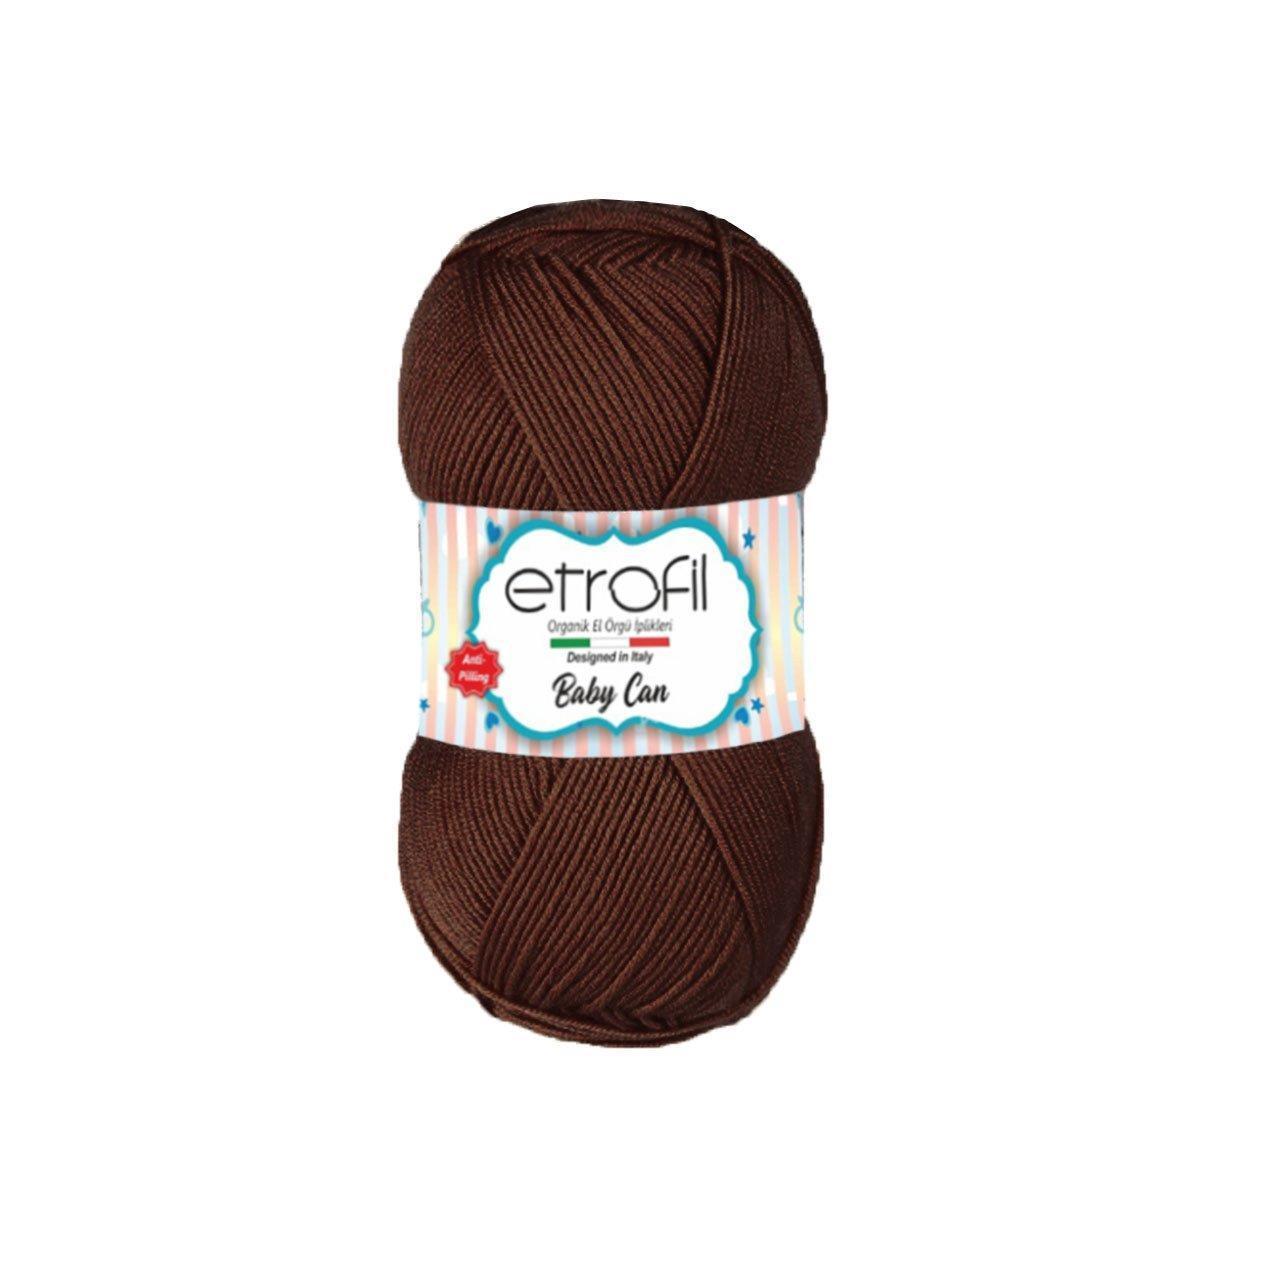 ETROFİL BABY CAN 80071 BROWN